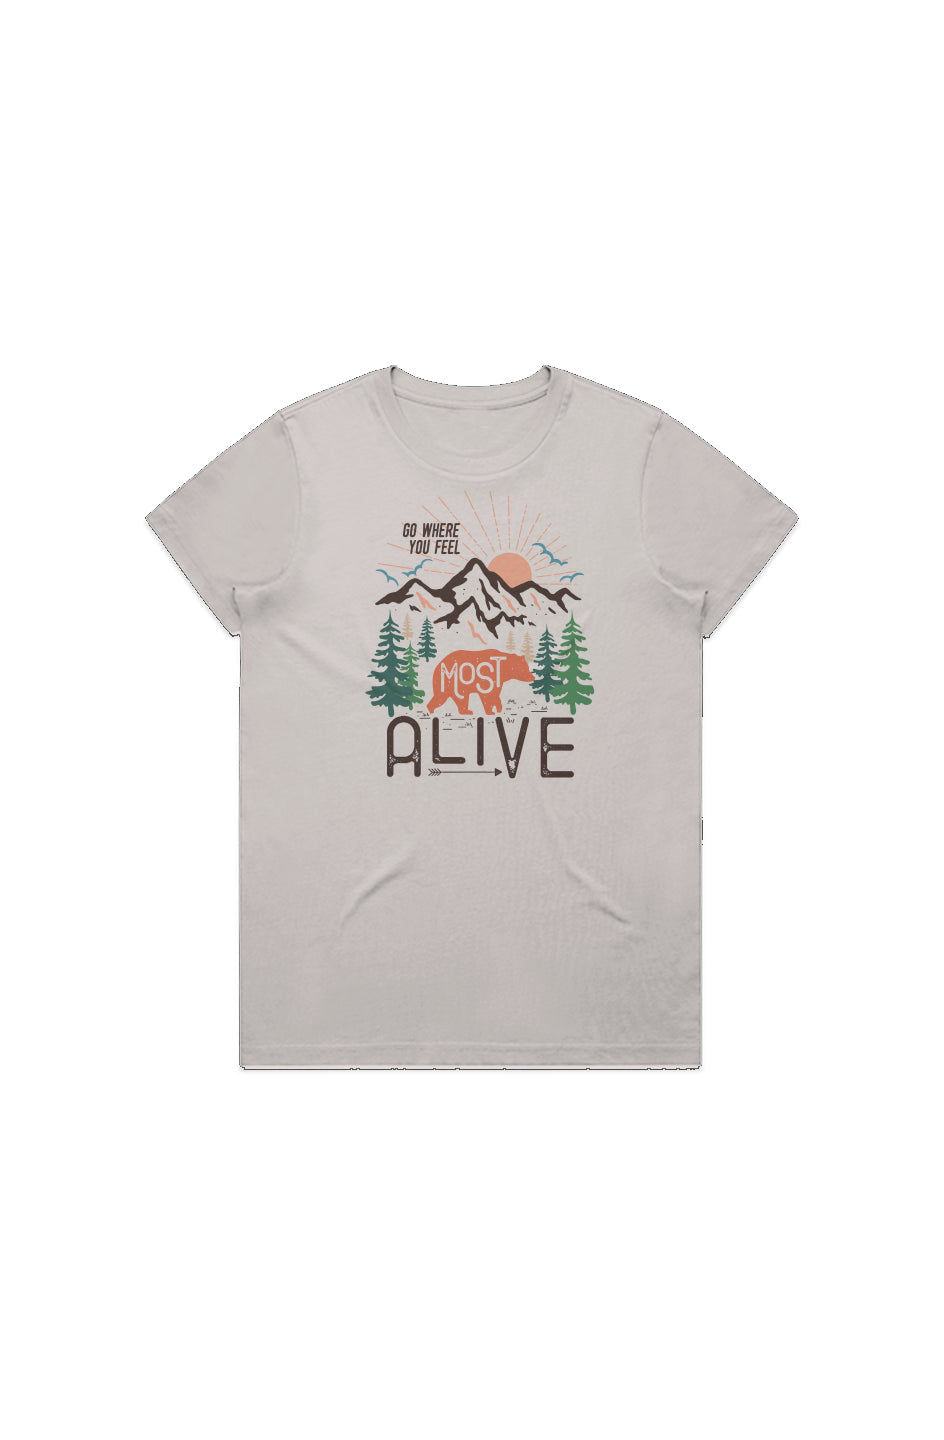 Most alive Tee